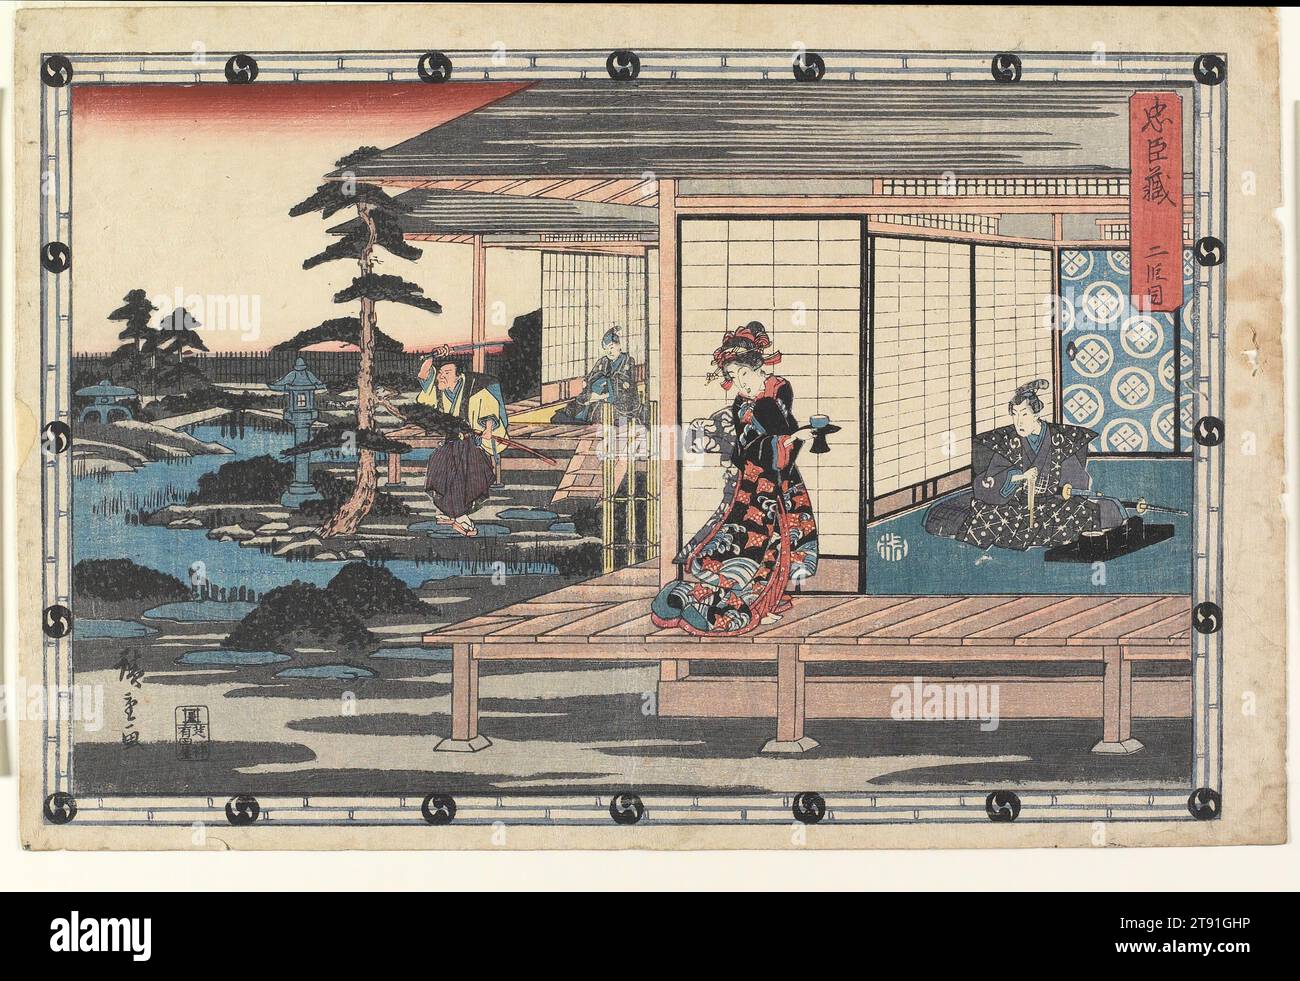 Act II, c. 1843-1847, Utagawa Hiroshige; Publisher: Aritaya Seiemon, Japanese, 1797 - 1858, 8 7/8 × 13 5/8 in. (22.5 × 34.6 cm) (image, horizontal ōban), Woodblock print (nishiki-e); ink and color on paper, Japan, 19th century, Act 2 of Chñshingura is comprised of entirely fictional subplots. One of these involves the star-crossed young lovers, Konami and Rikiya. Konami's father, Kakogawa Honzø is the chief retainer of Momoi Wakasanosuke, who suffers the abusive behavior of Moronao at the shogun's court. Trying to help his young immature lord, Honzø bribes Moronao Stock Photo